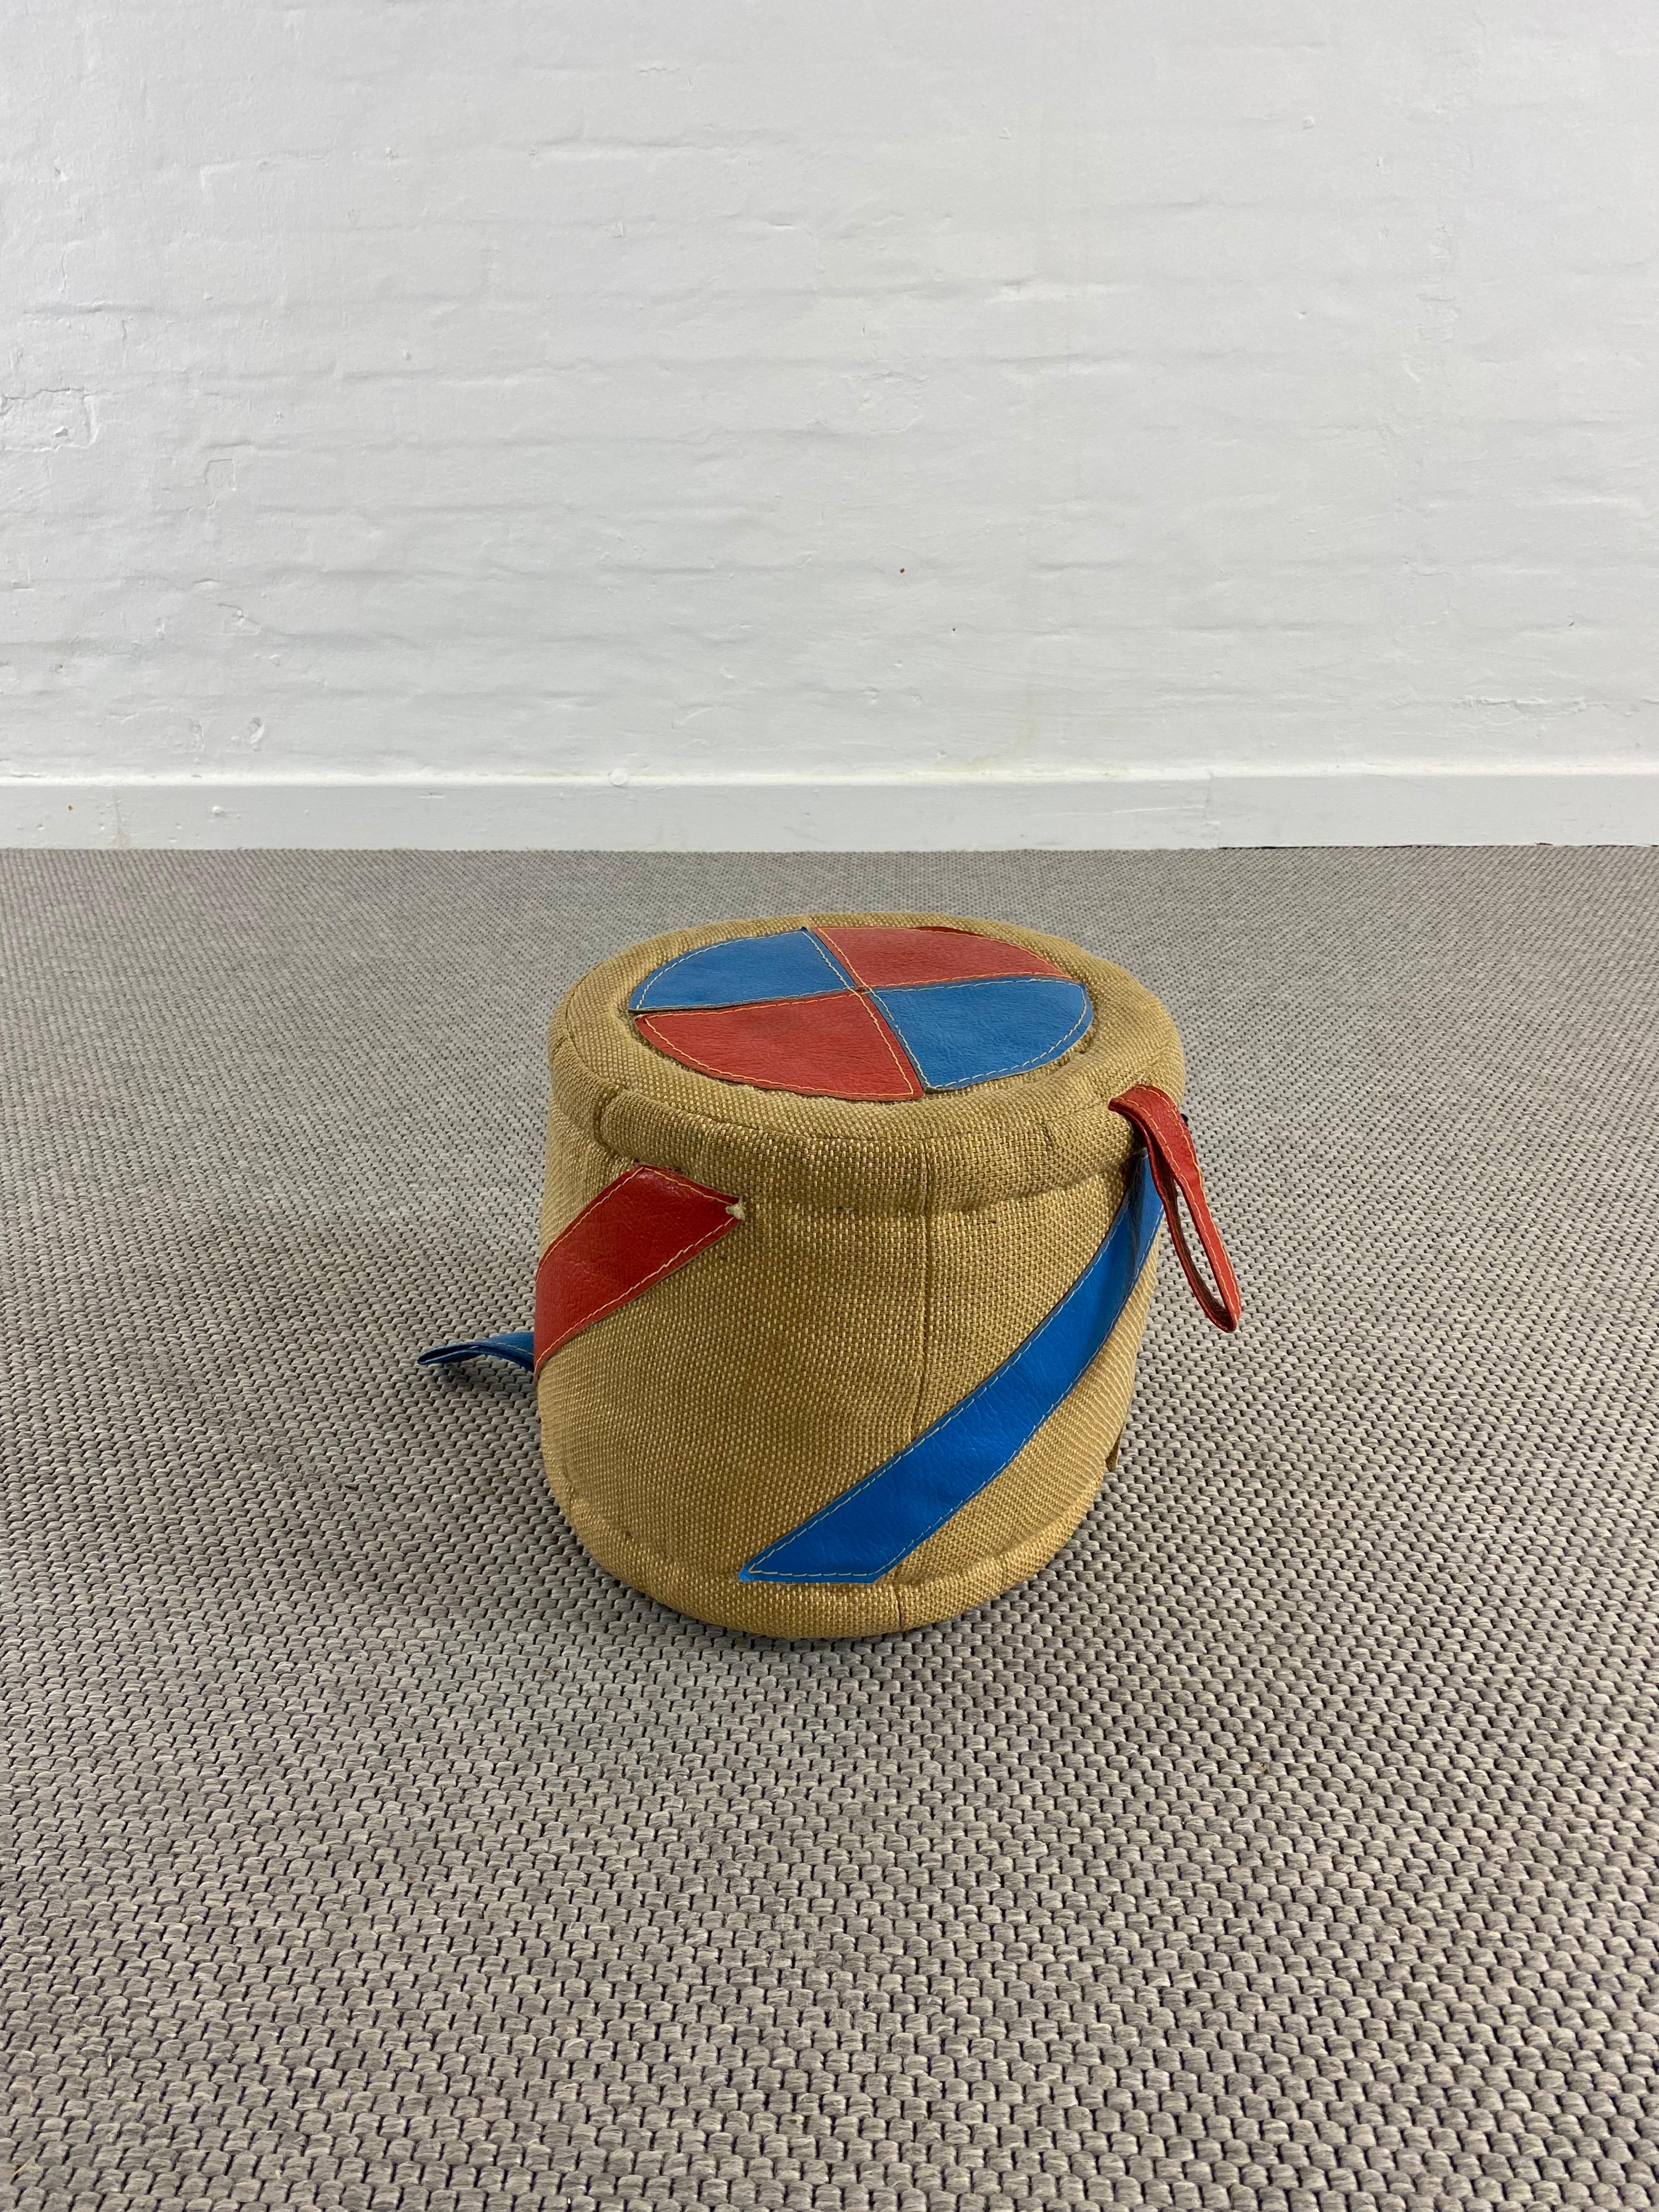 Pouf, Therapeutic Toy in Jute, Material by Renate Müller, Germany, GDR In Fair Condition For Sale In Halle, DE